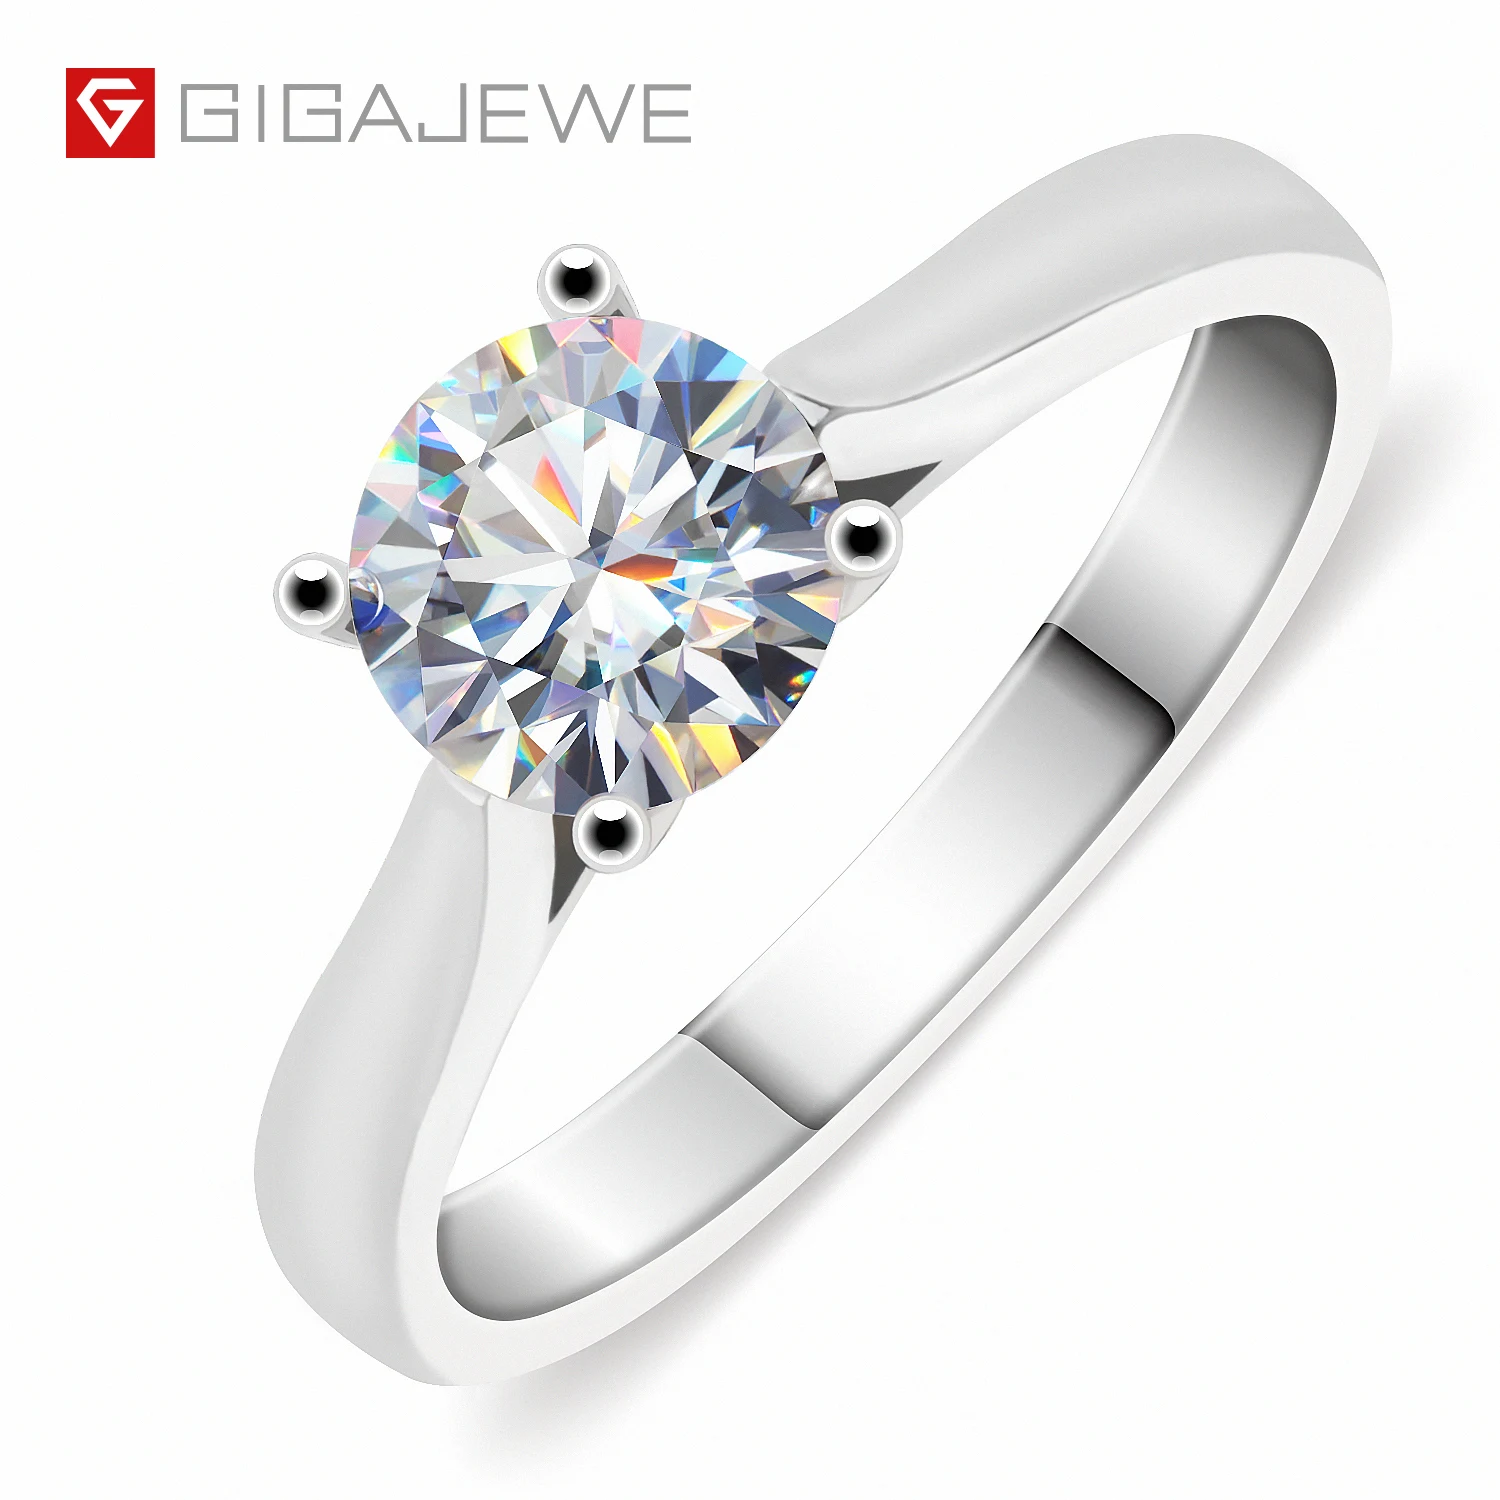 

GIGAJEWE 1ct 6.5mm Round Cut White EF color VVS1 Moissanite 925 Silver Ring plated with 18k gold